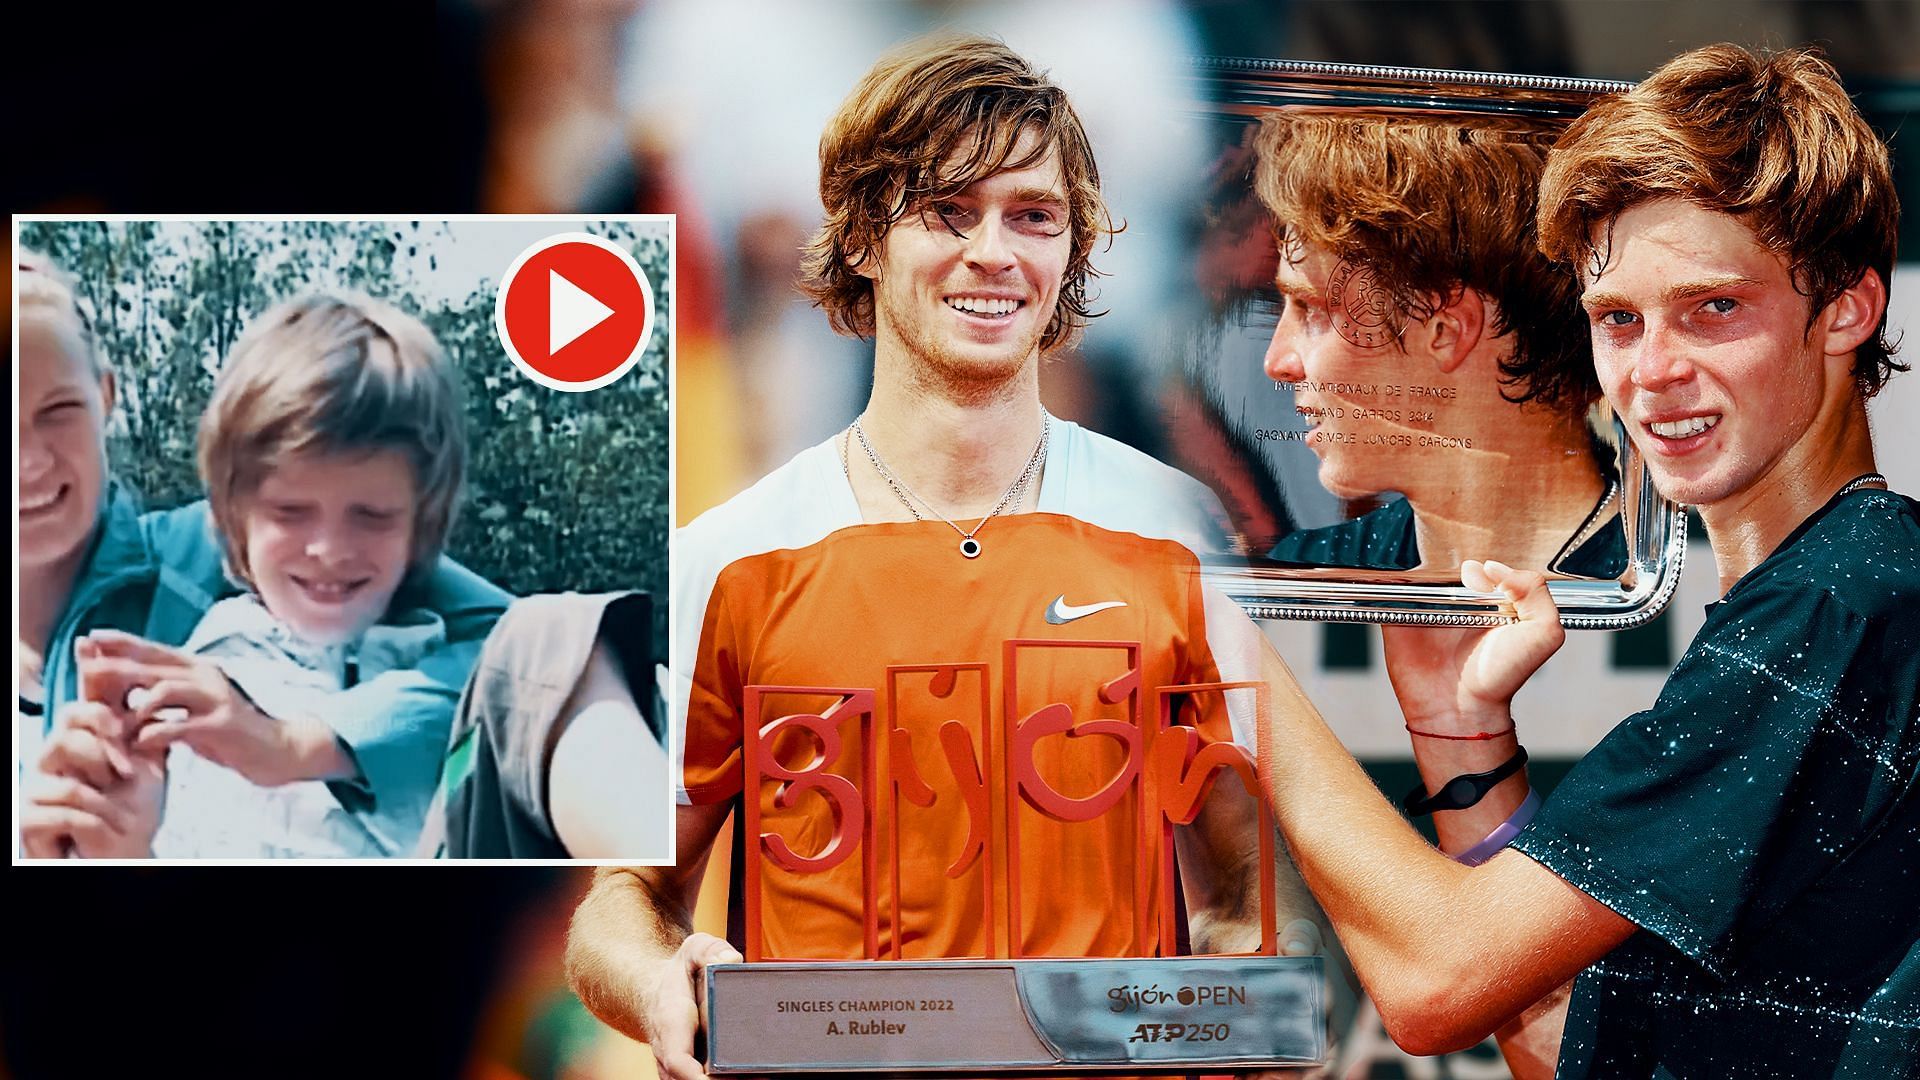 Andrey Rublev recently reacted to a fan-made tribute video of him, getting all emotional